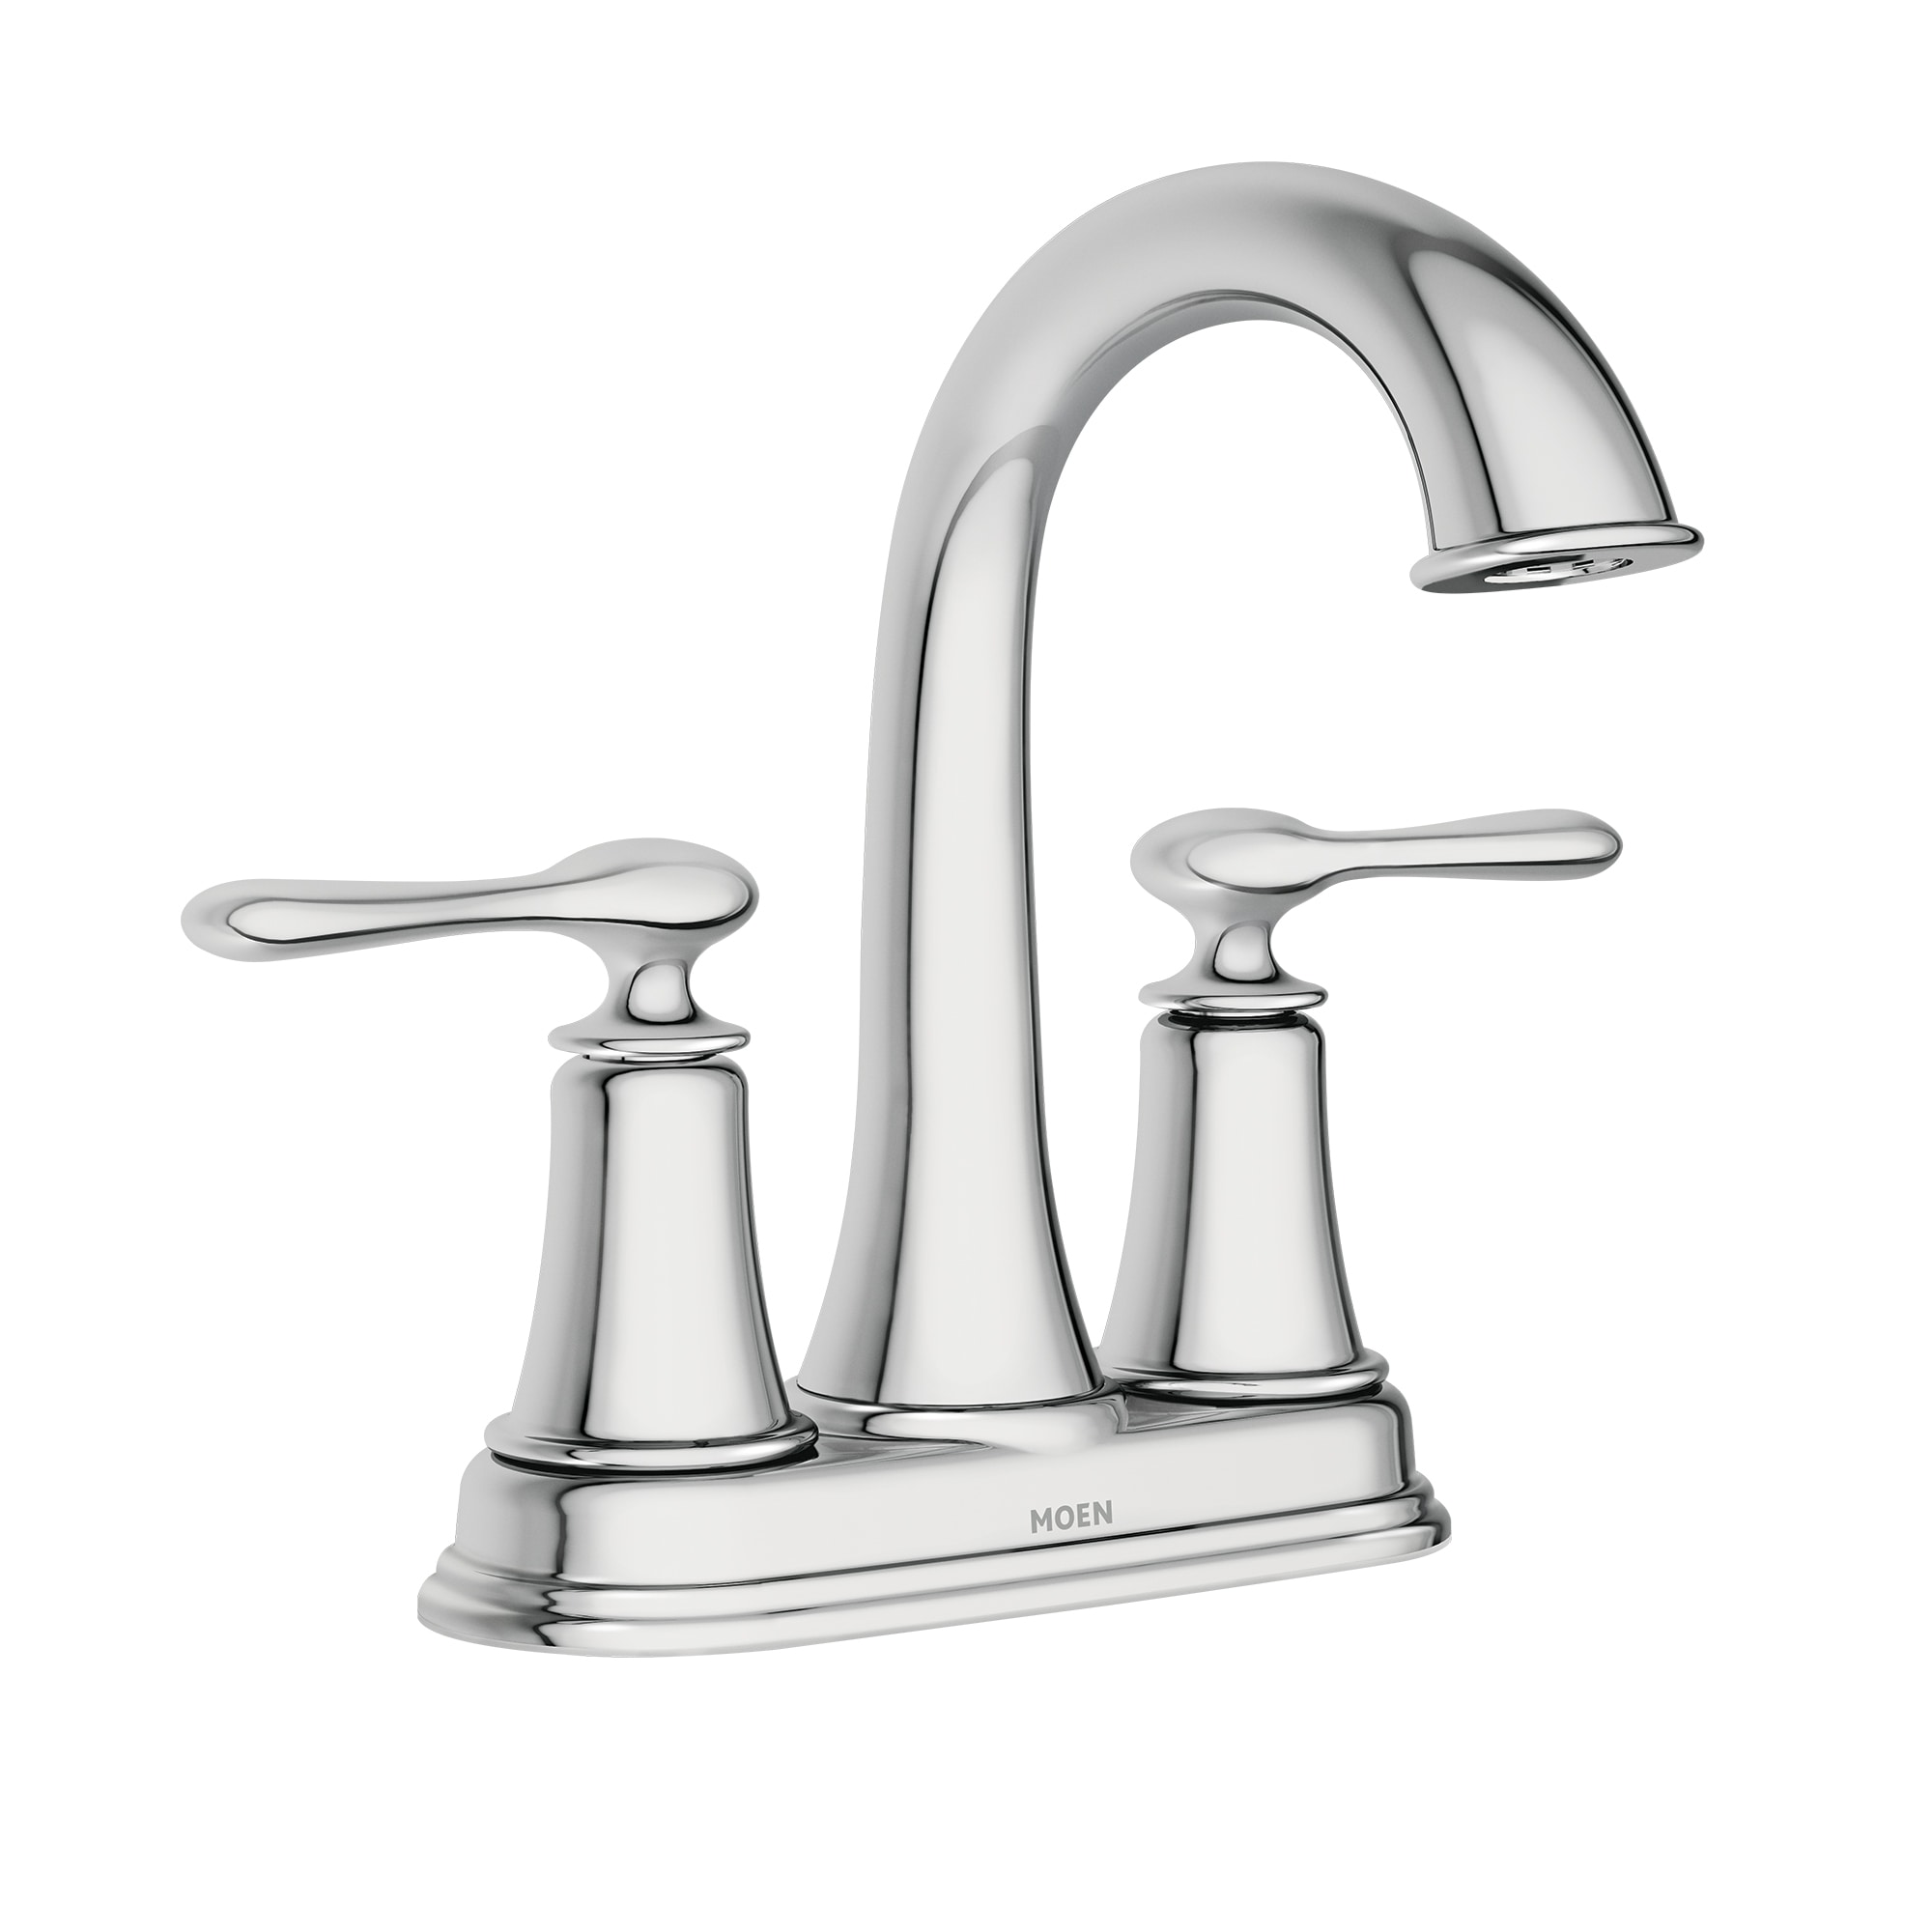 Moen Chrome Bathroom Sink Faucets at Lowes.com